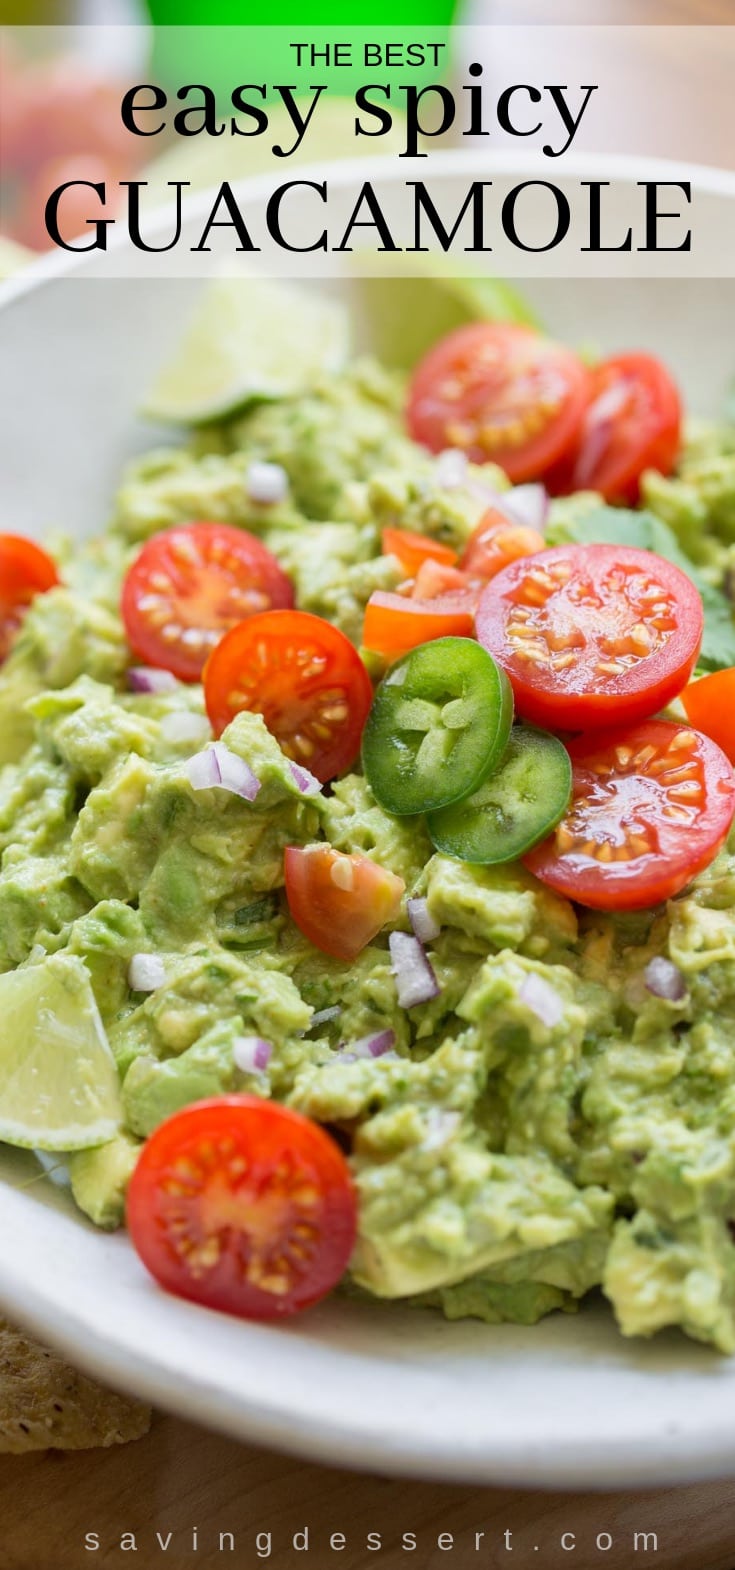 Easy Spicy Guacamole ~ incredibly delicious made fresh at your own table, hand crafted and seasoned just the way you like it. #guacamole #spicyguacamole #cincodemayo #mexican #avocado #easyguac #appetizer #dip